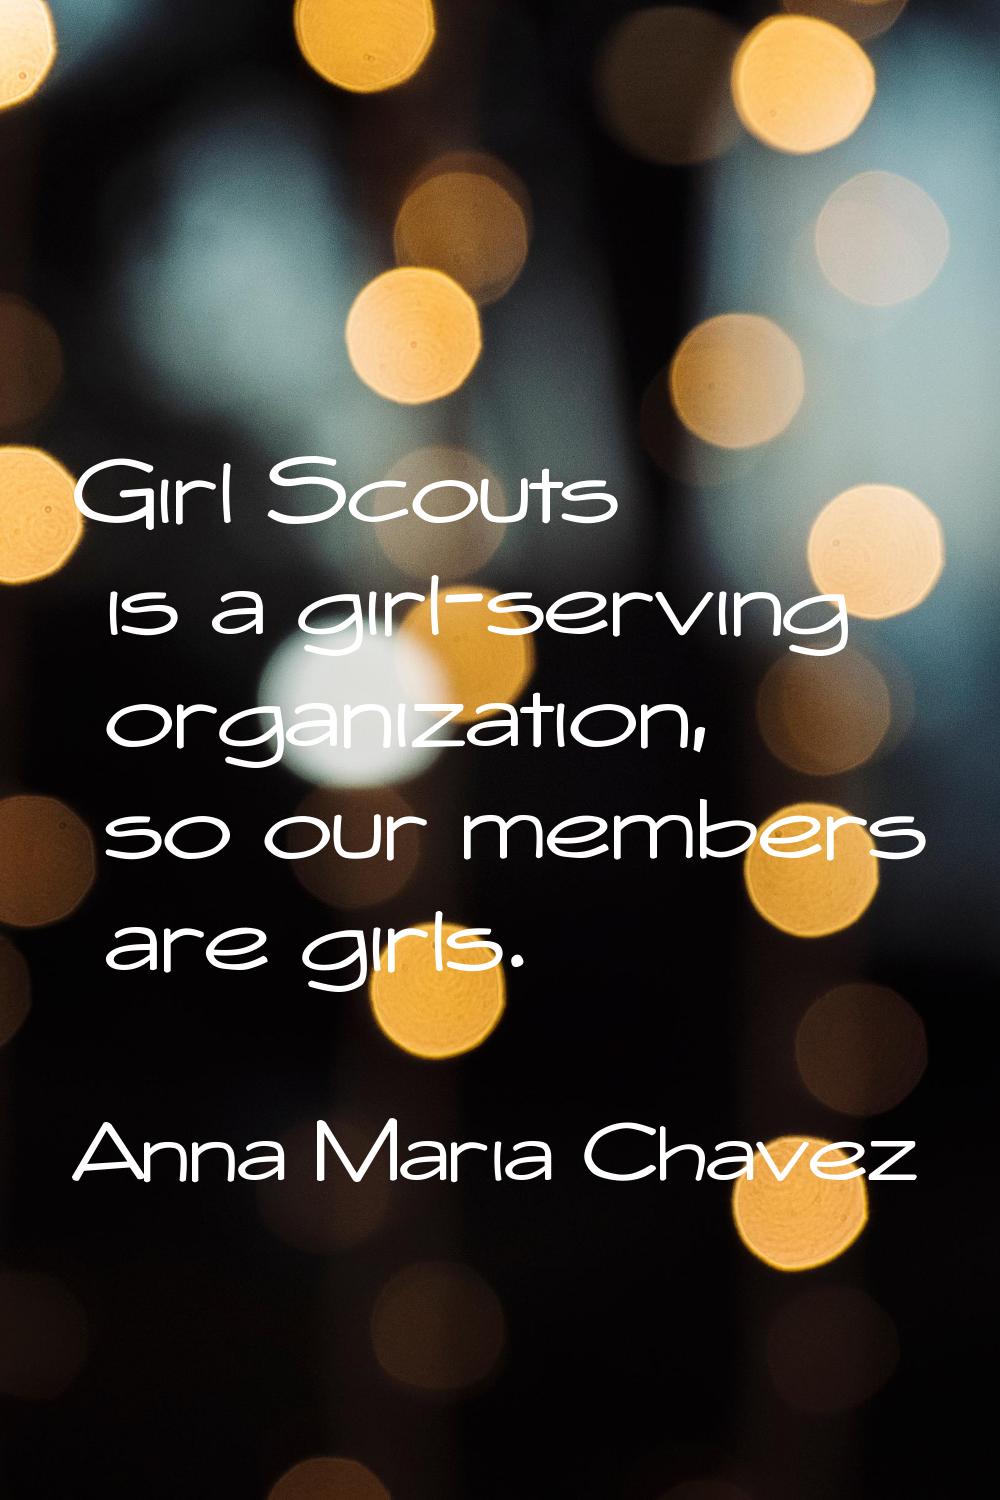 Girl Scouts is a girl-serving organization, so our members are girls.